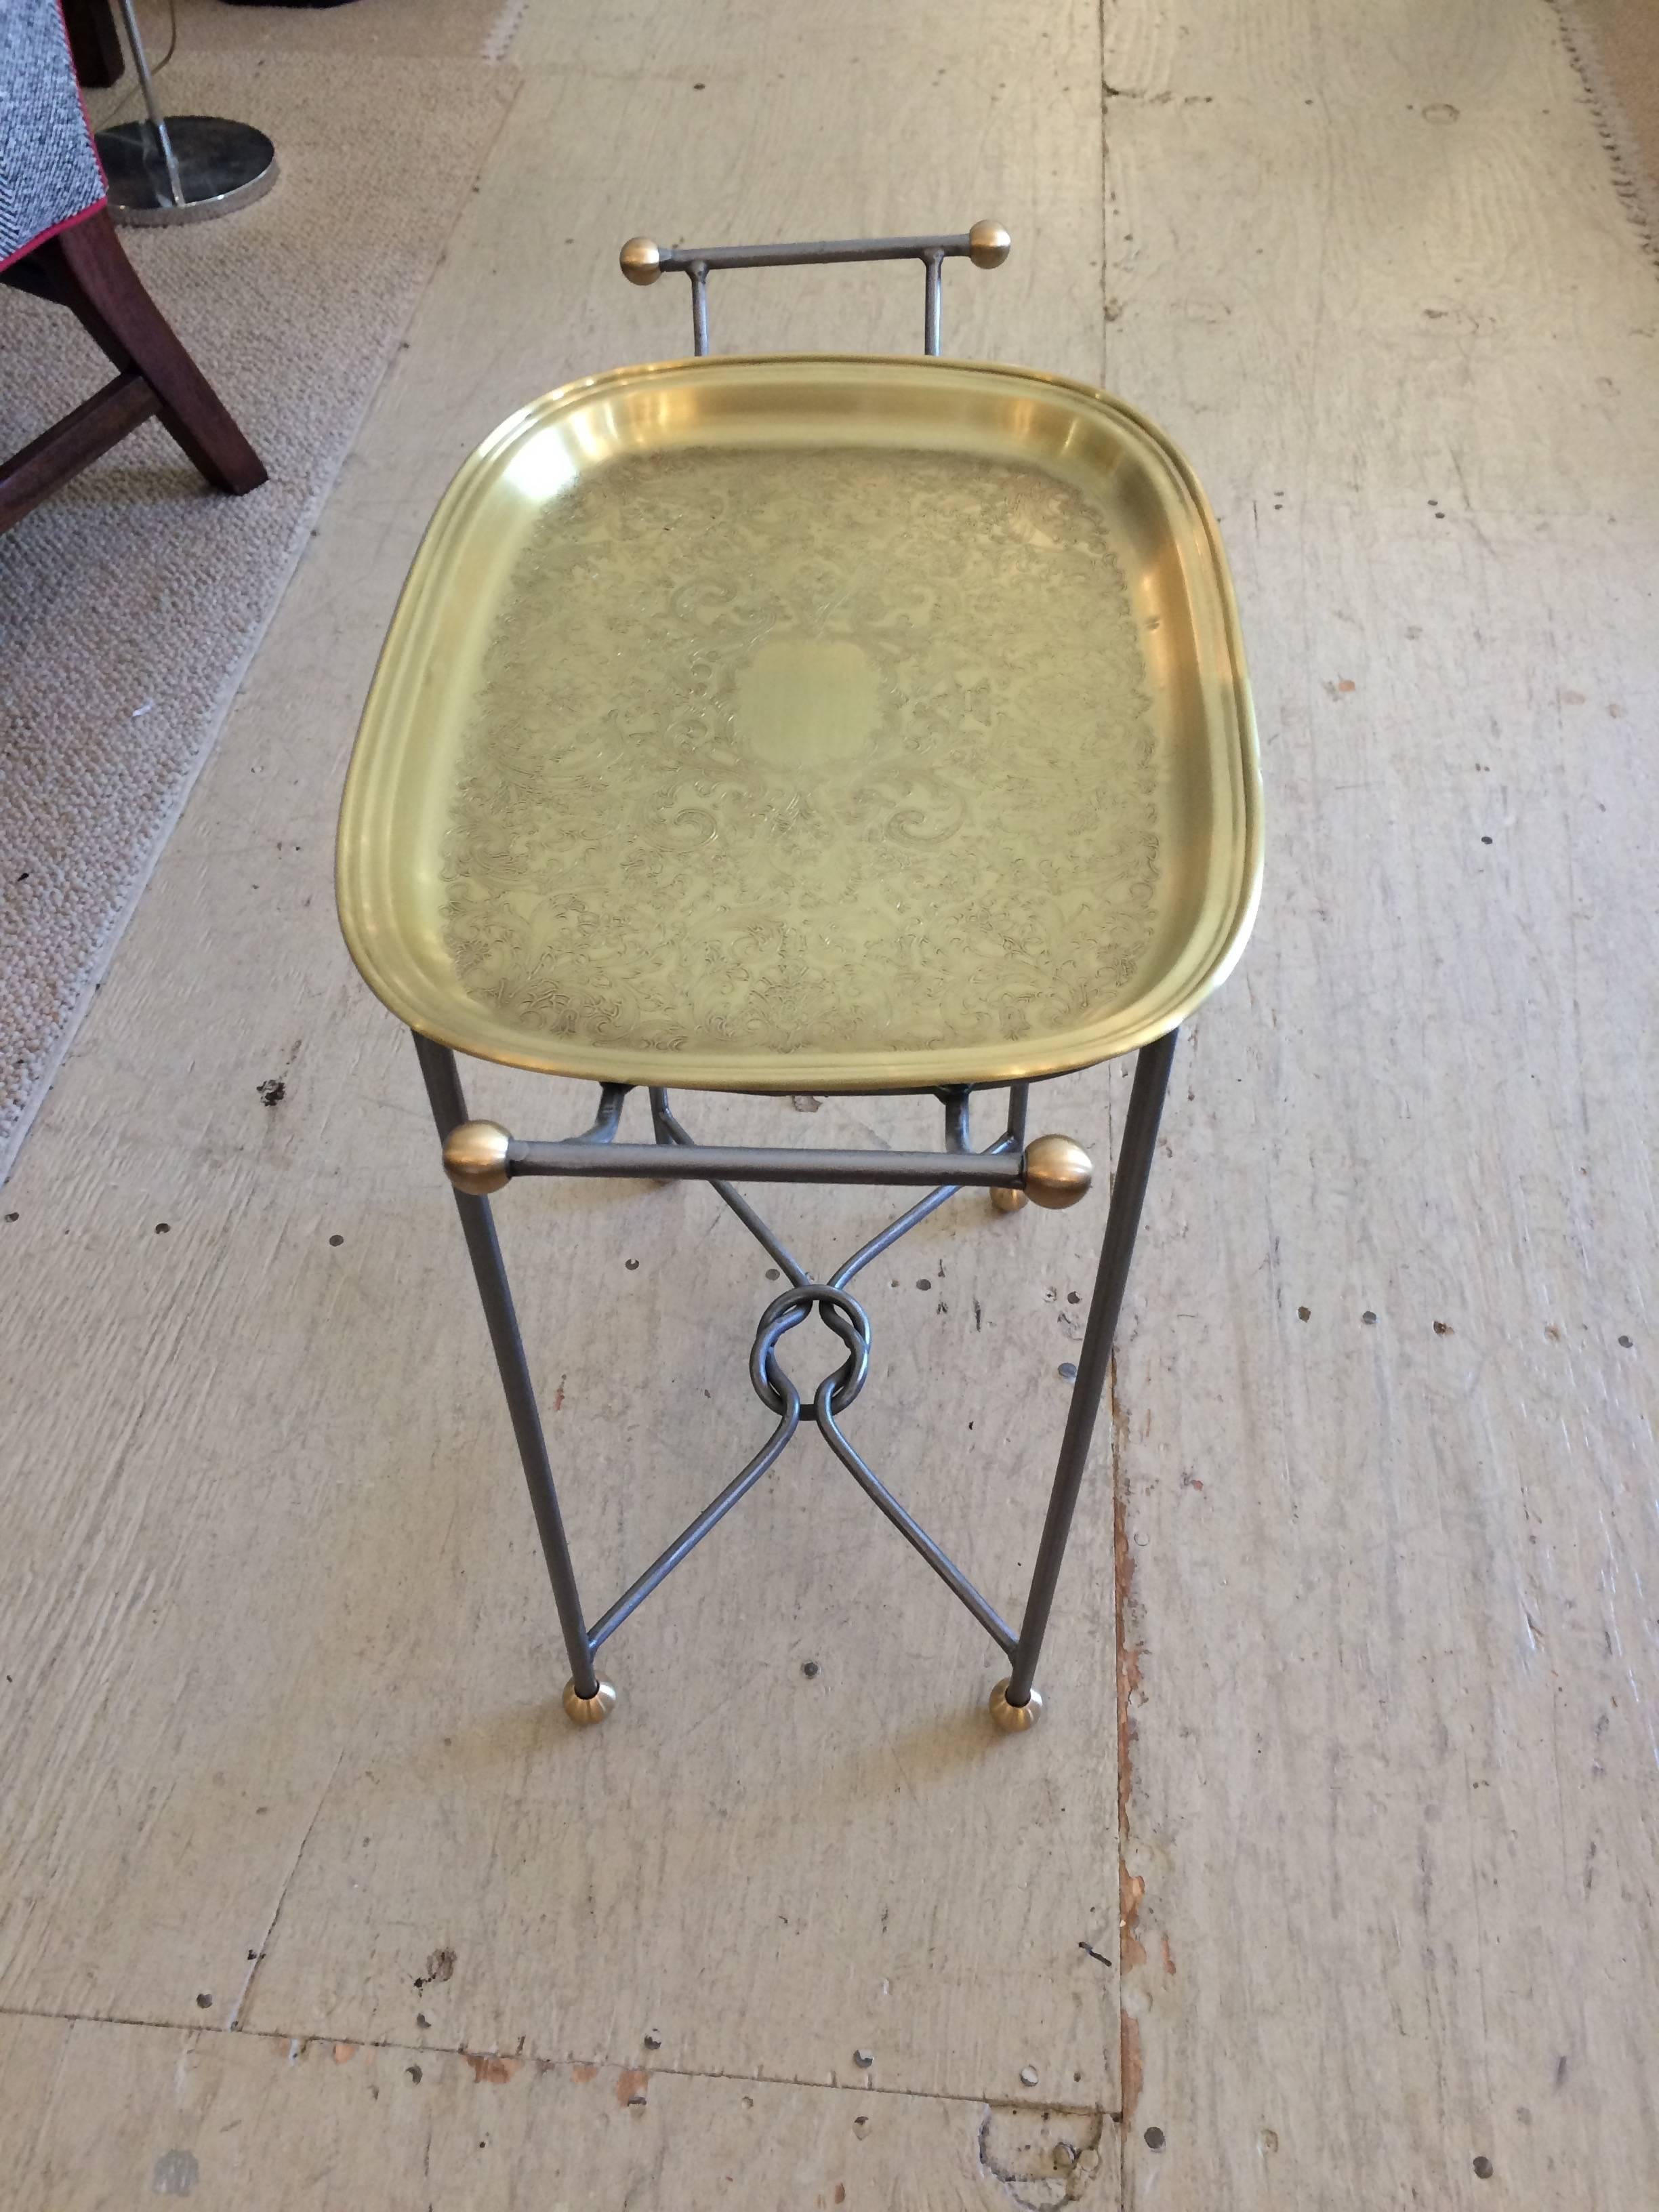 Sophisticated little “drinks” table in brass. Brass tray top is removable, and base is steel with brass ball feet. Brass has been lacquered for protection of surface.